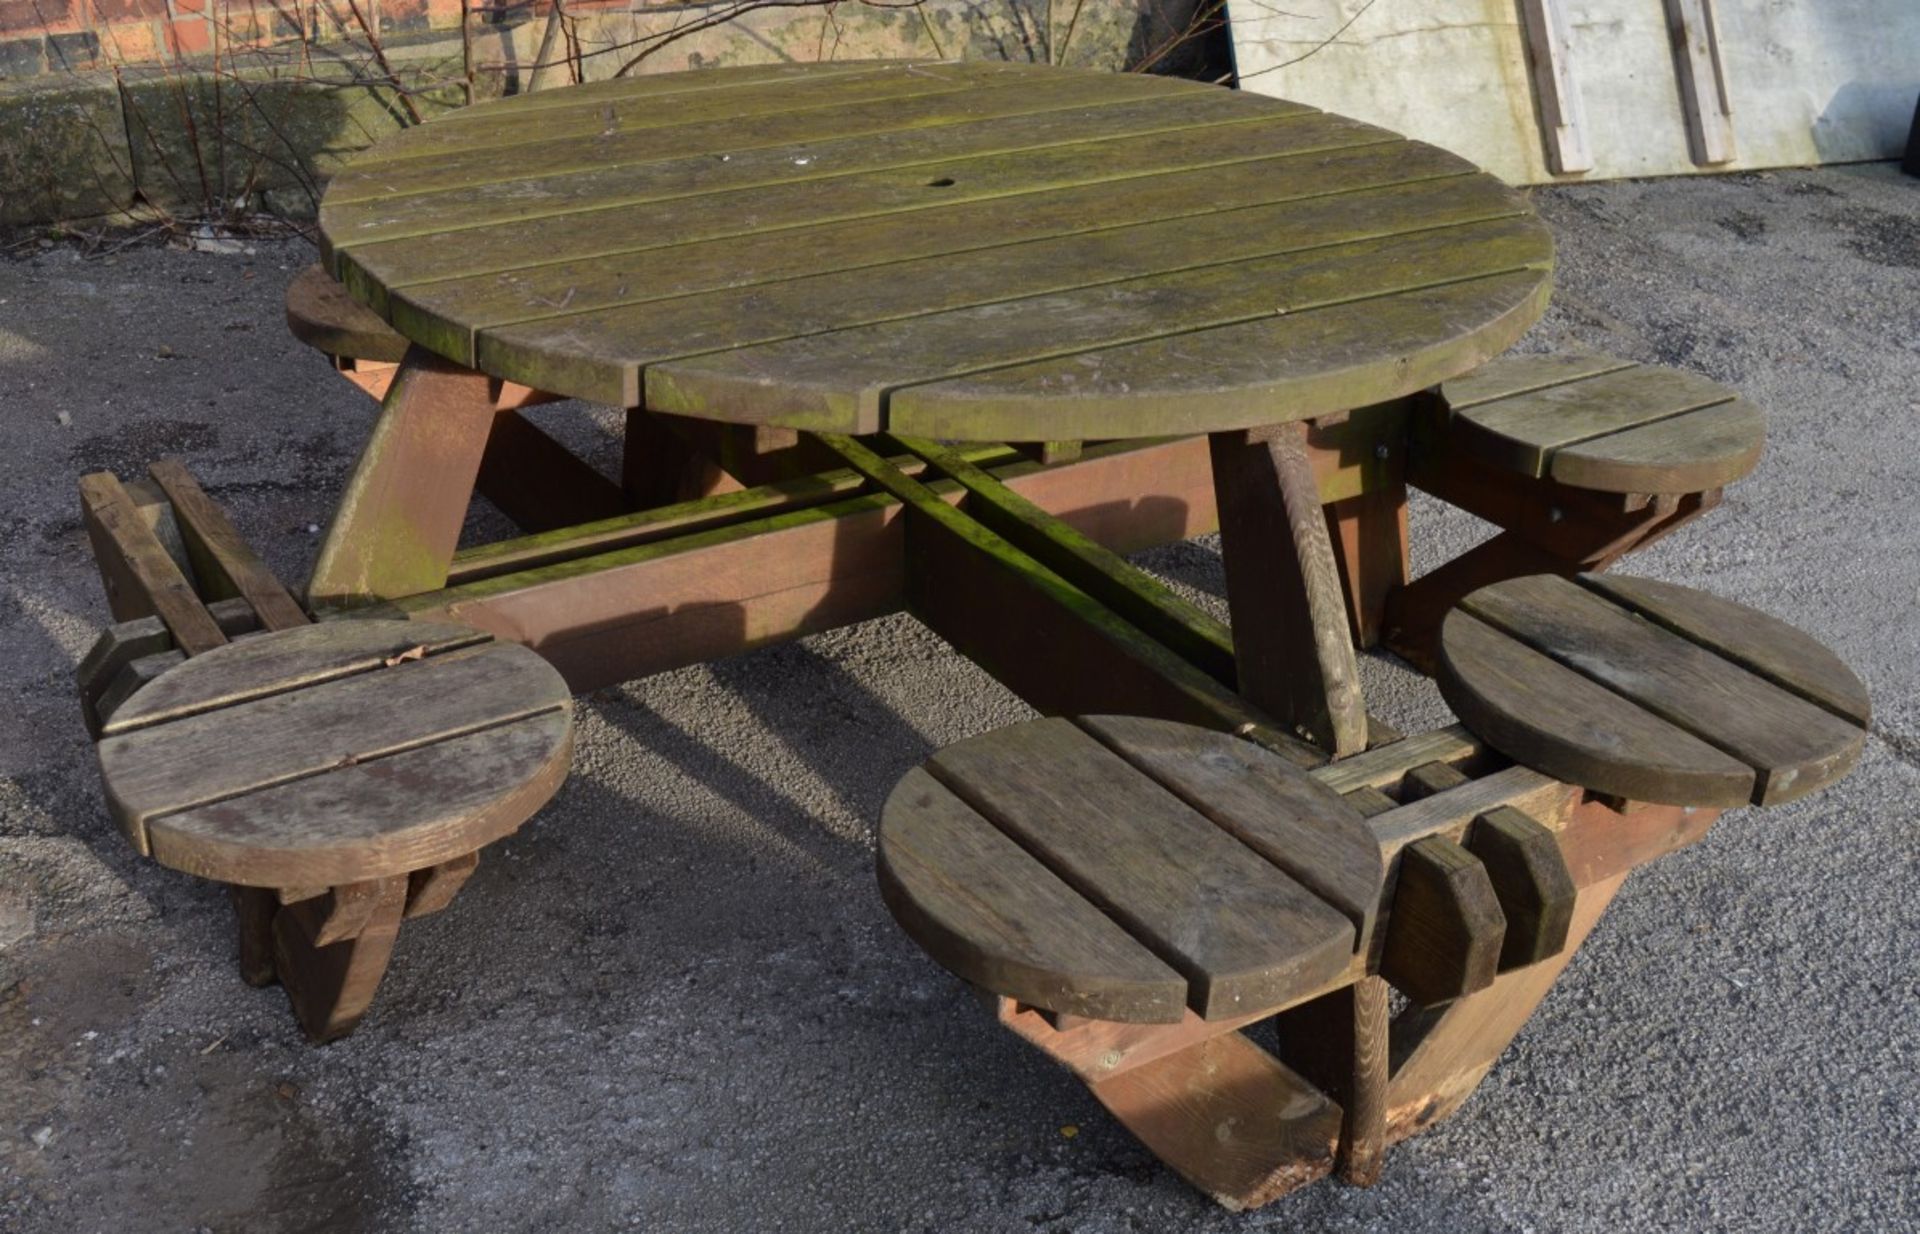 1 x Outdoor Picnic Pub Bench - Designed For 8 People To Be Sat Around a Circular Table - Ideal For - Image 2 of 4